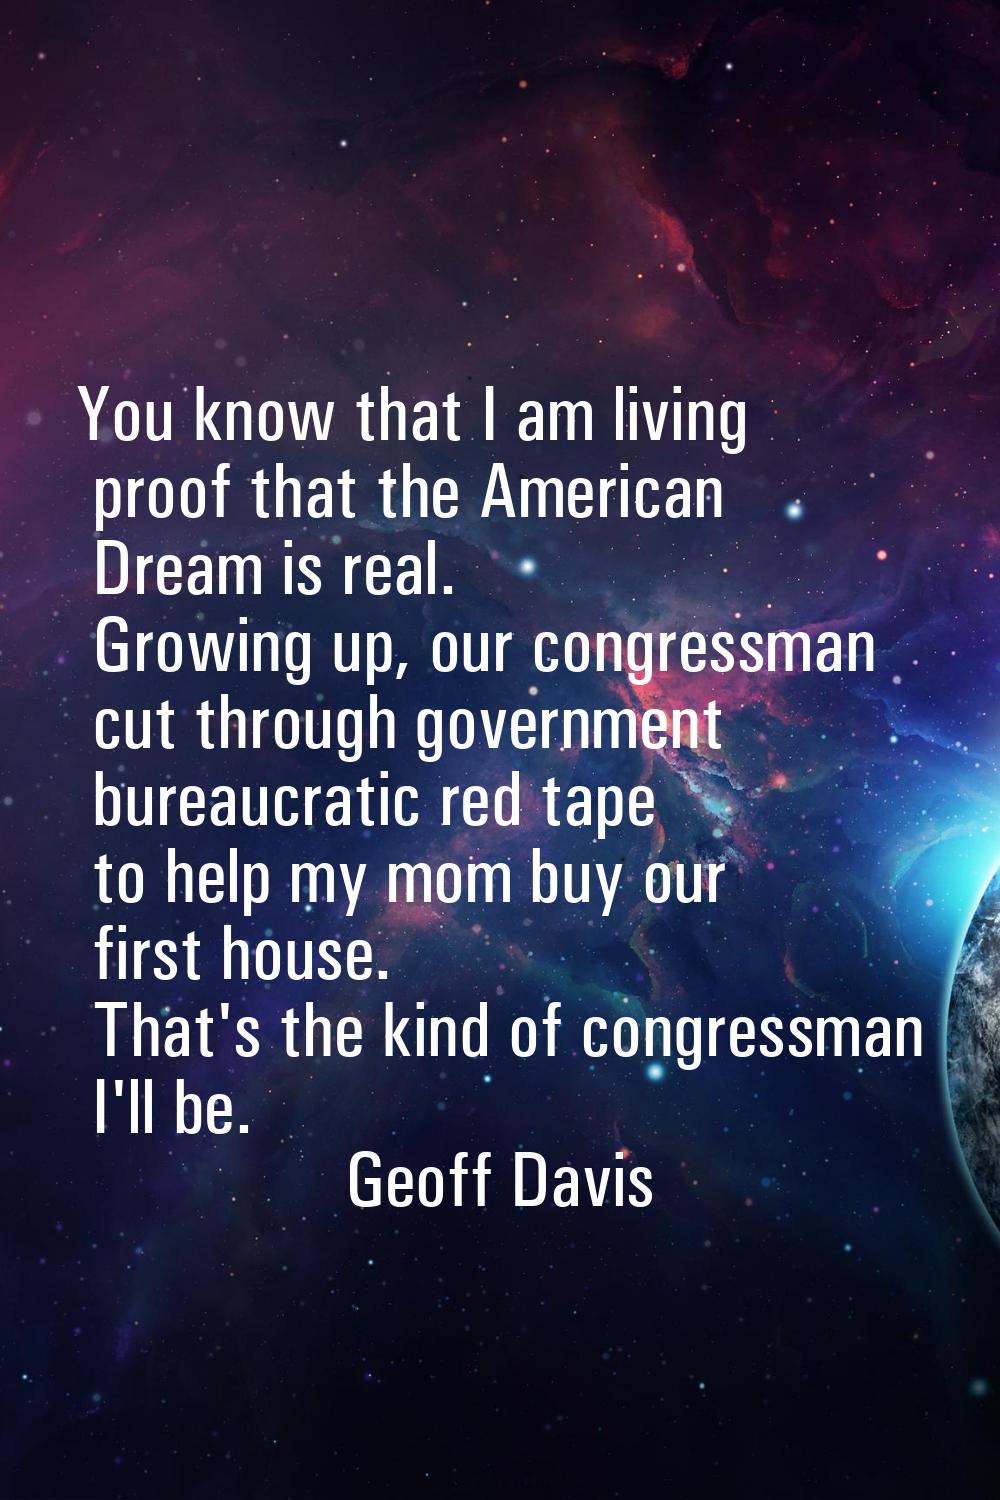 You know that I am living proof that the American Dream is real. Growing up, our congressman cut th